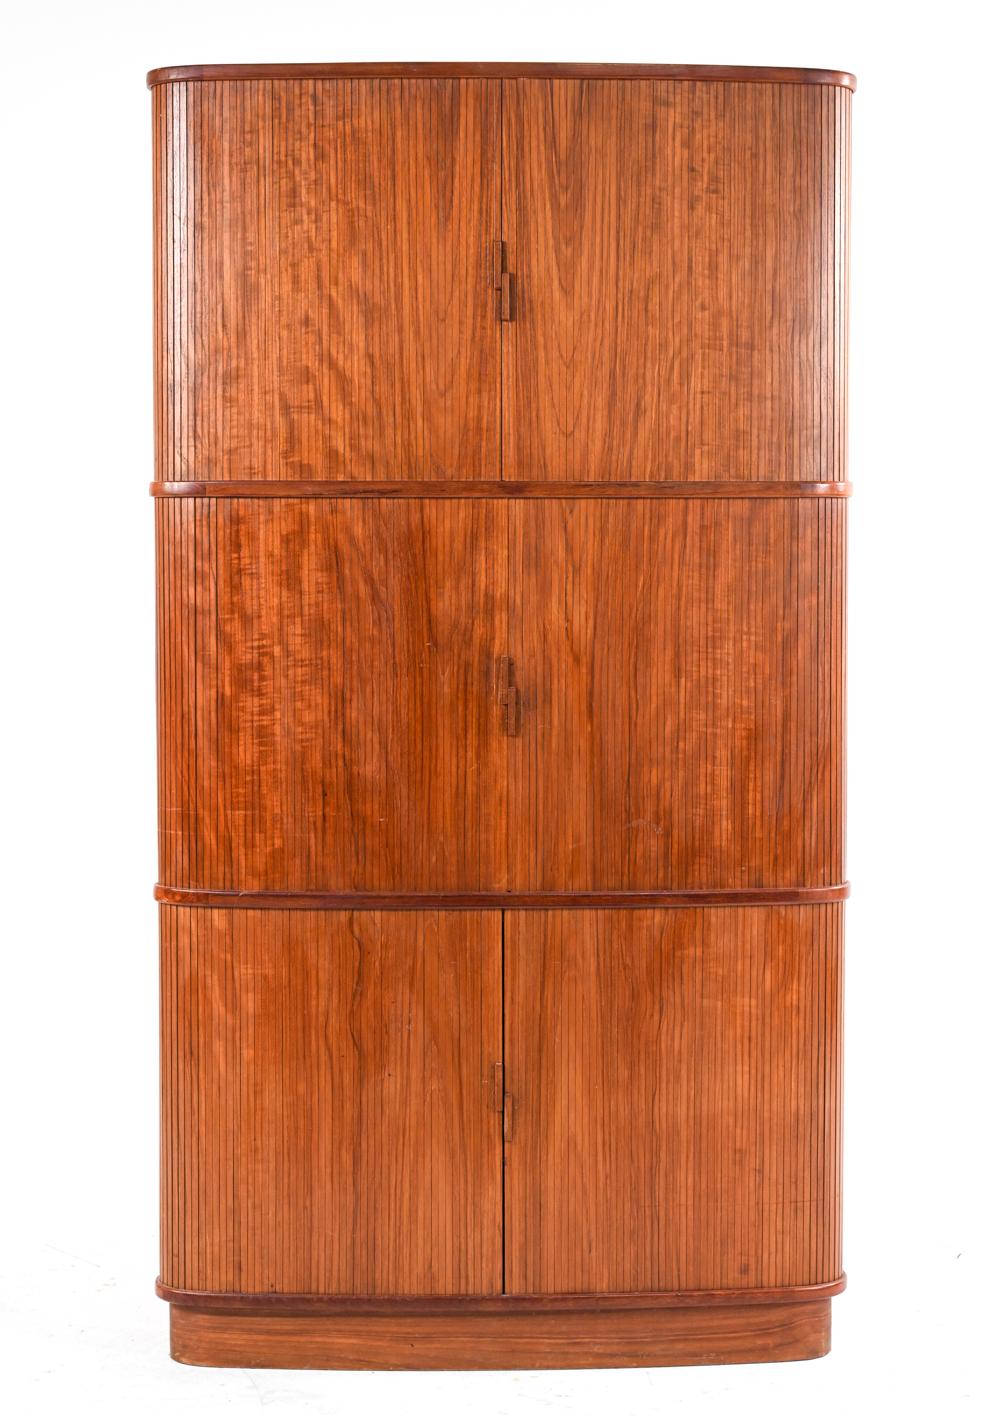 An unusual and functional corner cabinet in teak wood with fun rounded form, designed by Niels O. Møller for J.L. Møller and produced in the 1960's. Three sets of tambour doors slide apart to reveal two drawers and a plethora of adjustable shelves